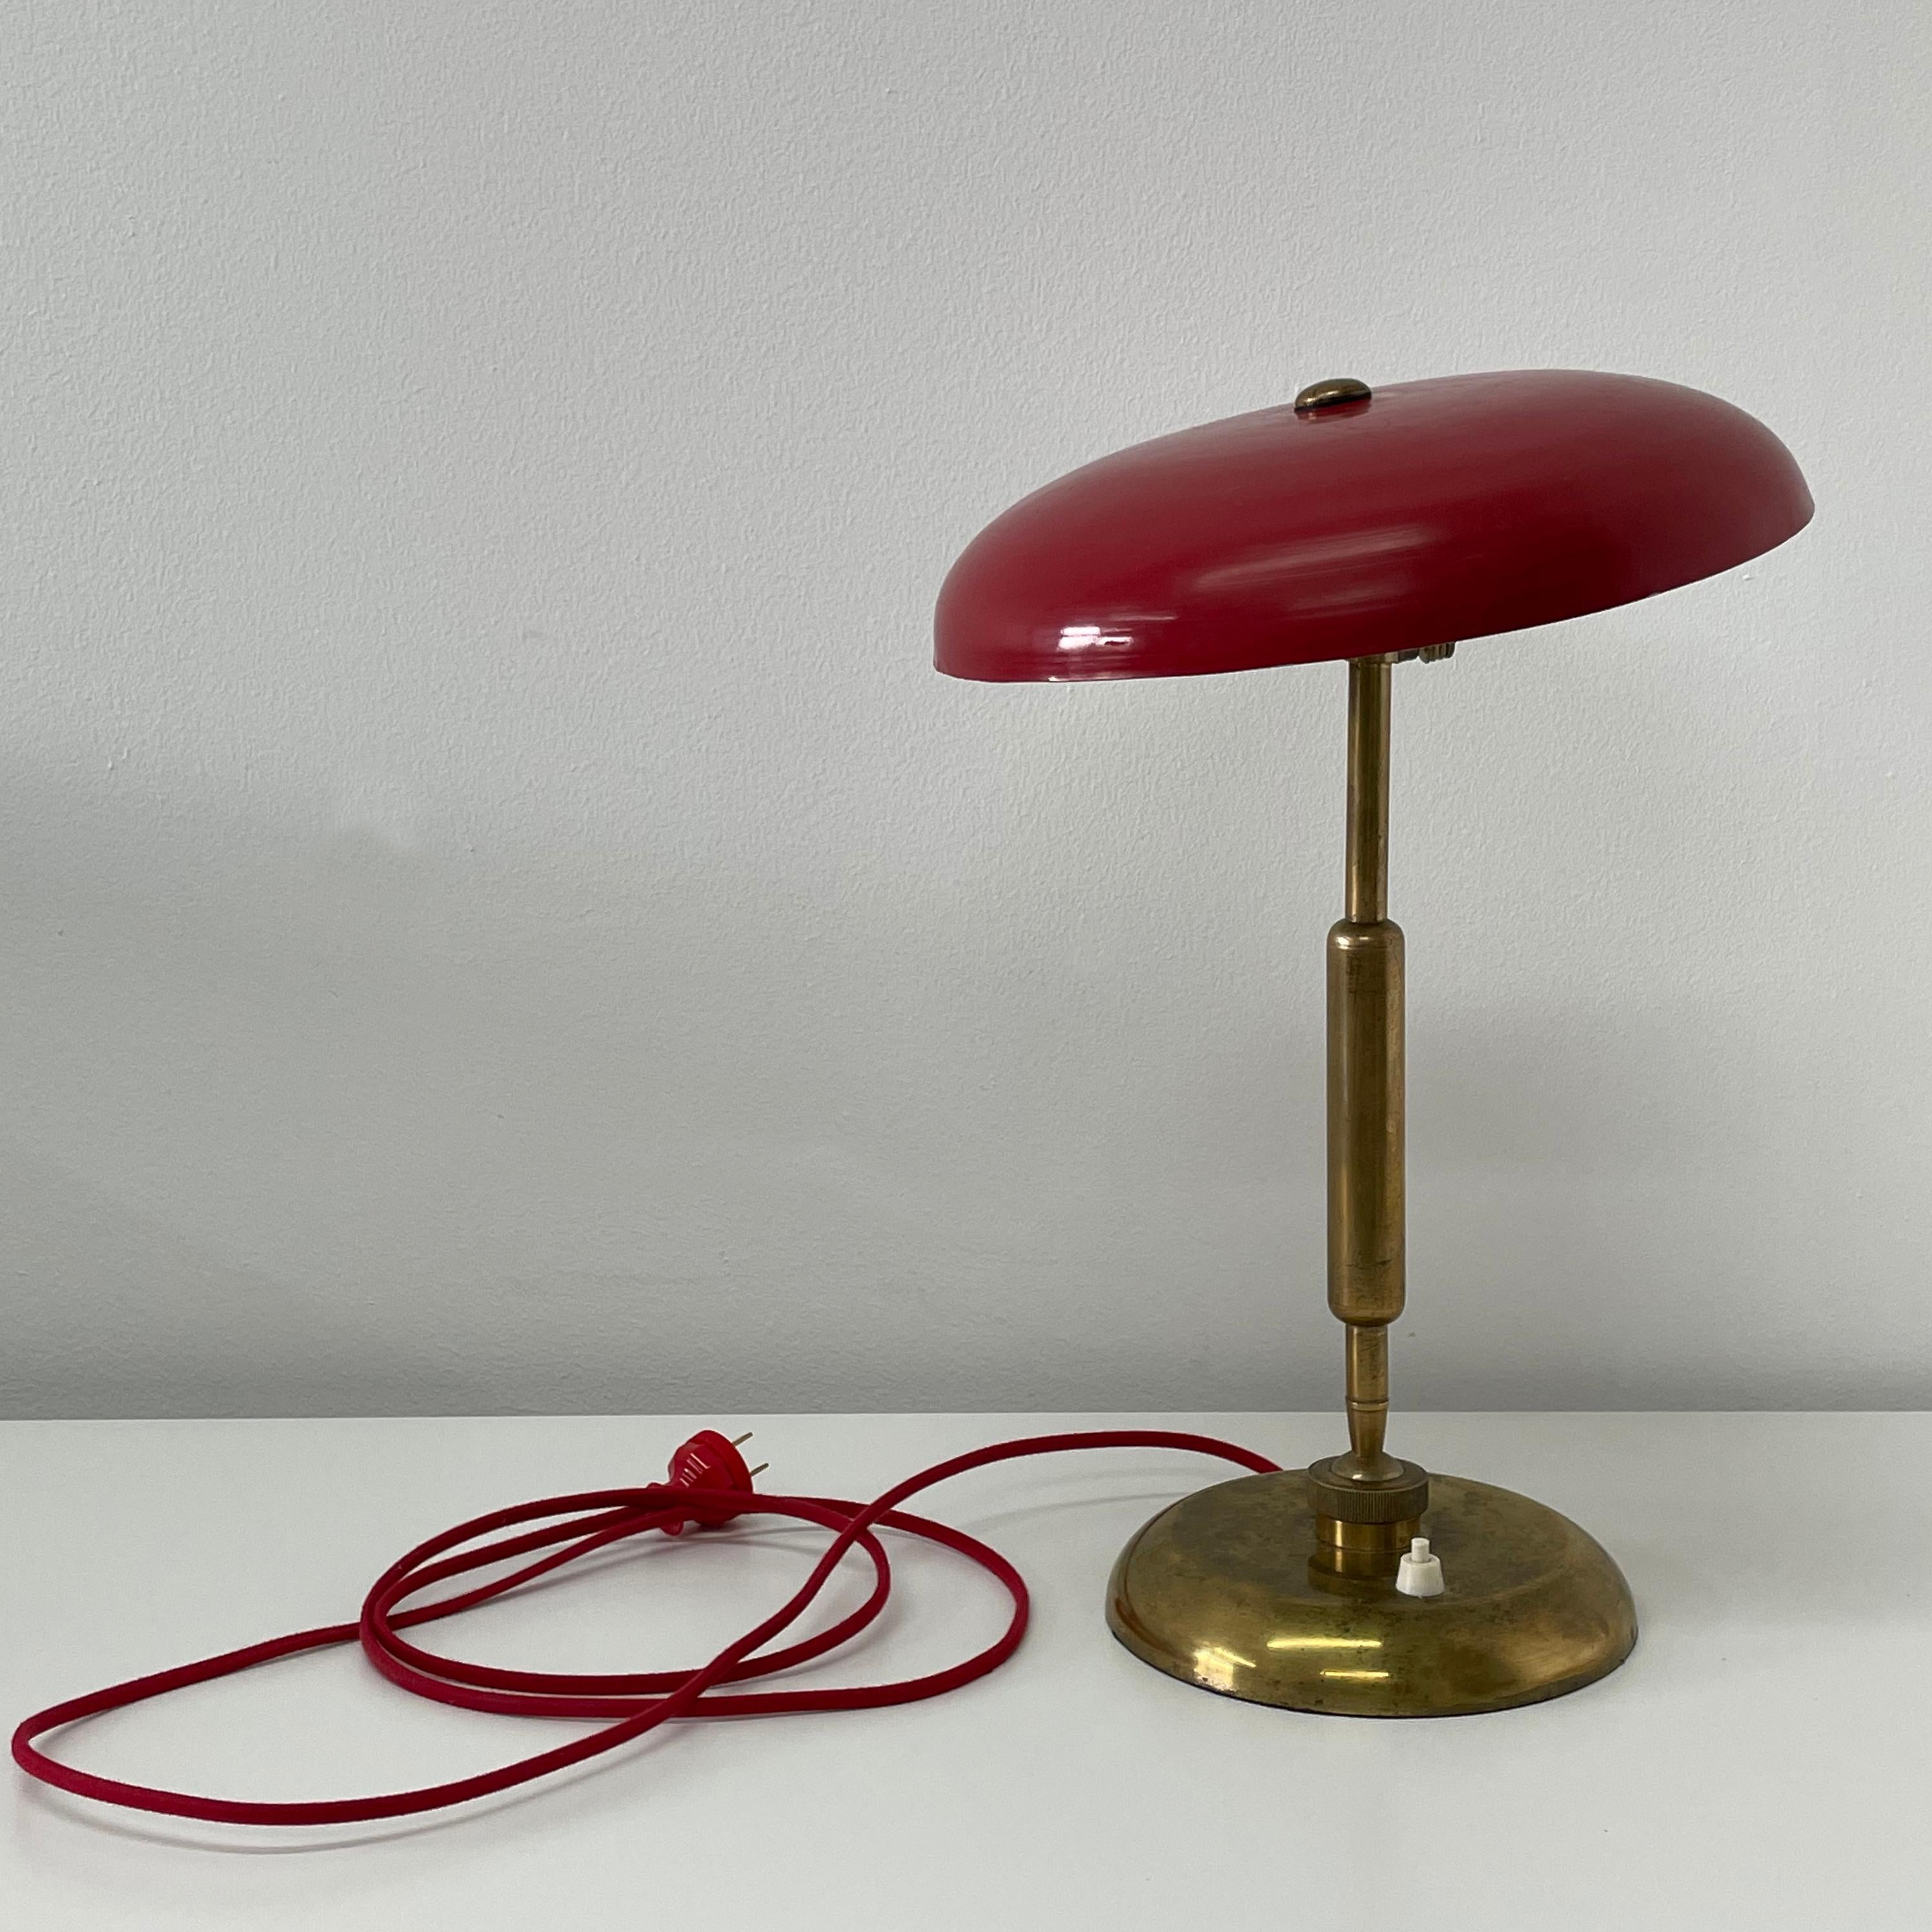 This brass lamp with lacquered cherry red shade designed by Oscar Tarlasco has a double ball joint that enables one to adjust the cant of both the stem and the shade. The lower joint has a handsome knurled collar detail. Its friendly shape,